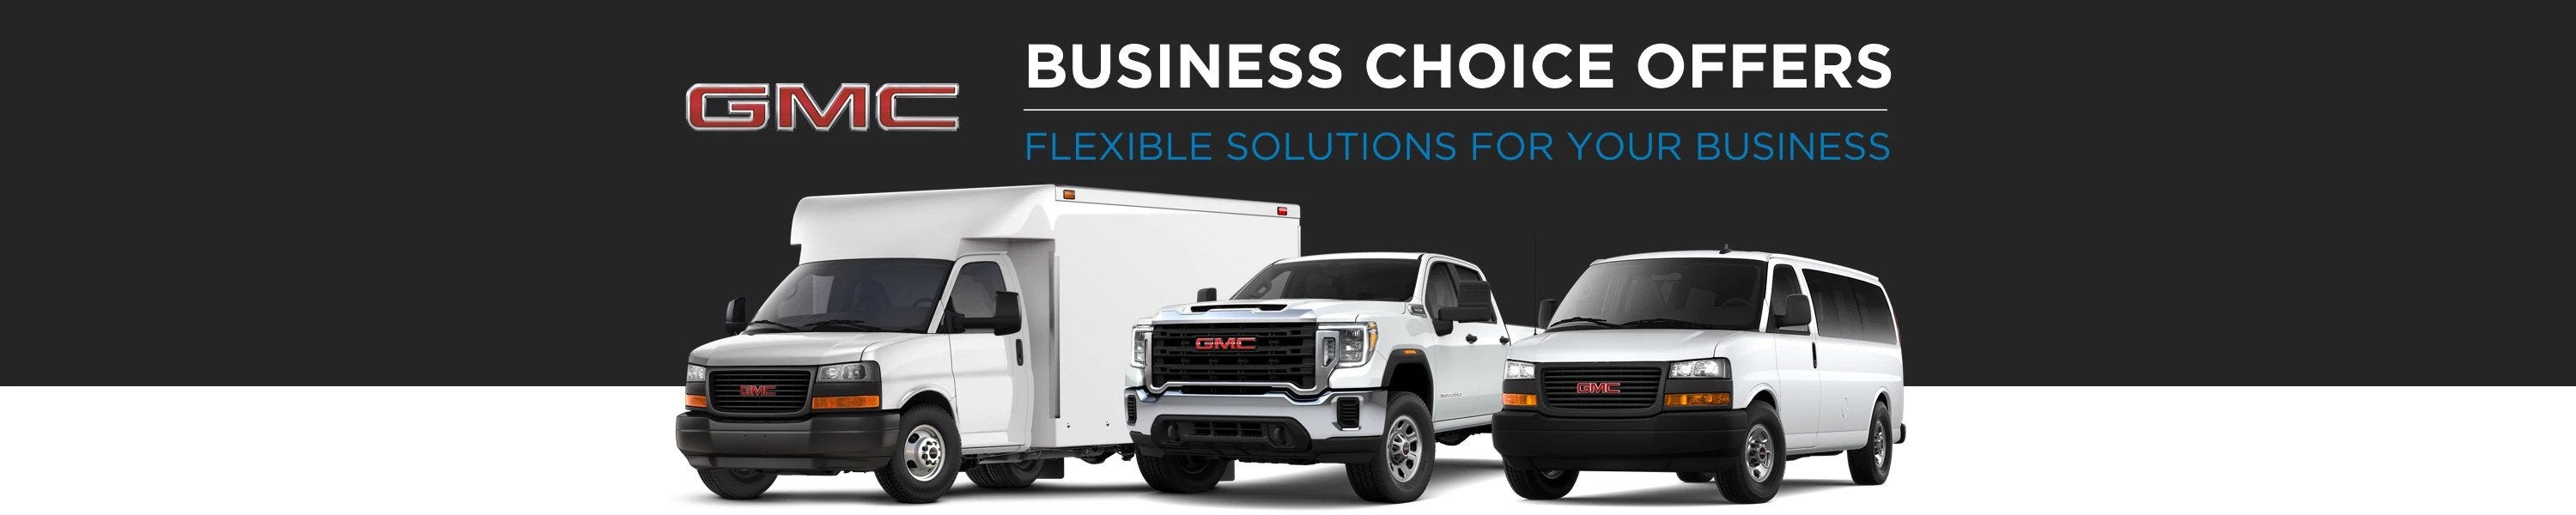 GMC Business Choice Offers - Flexible Solutions for your Business - Crain Buick GMC in Conway AR